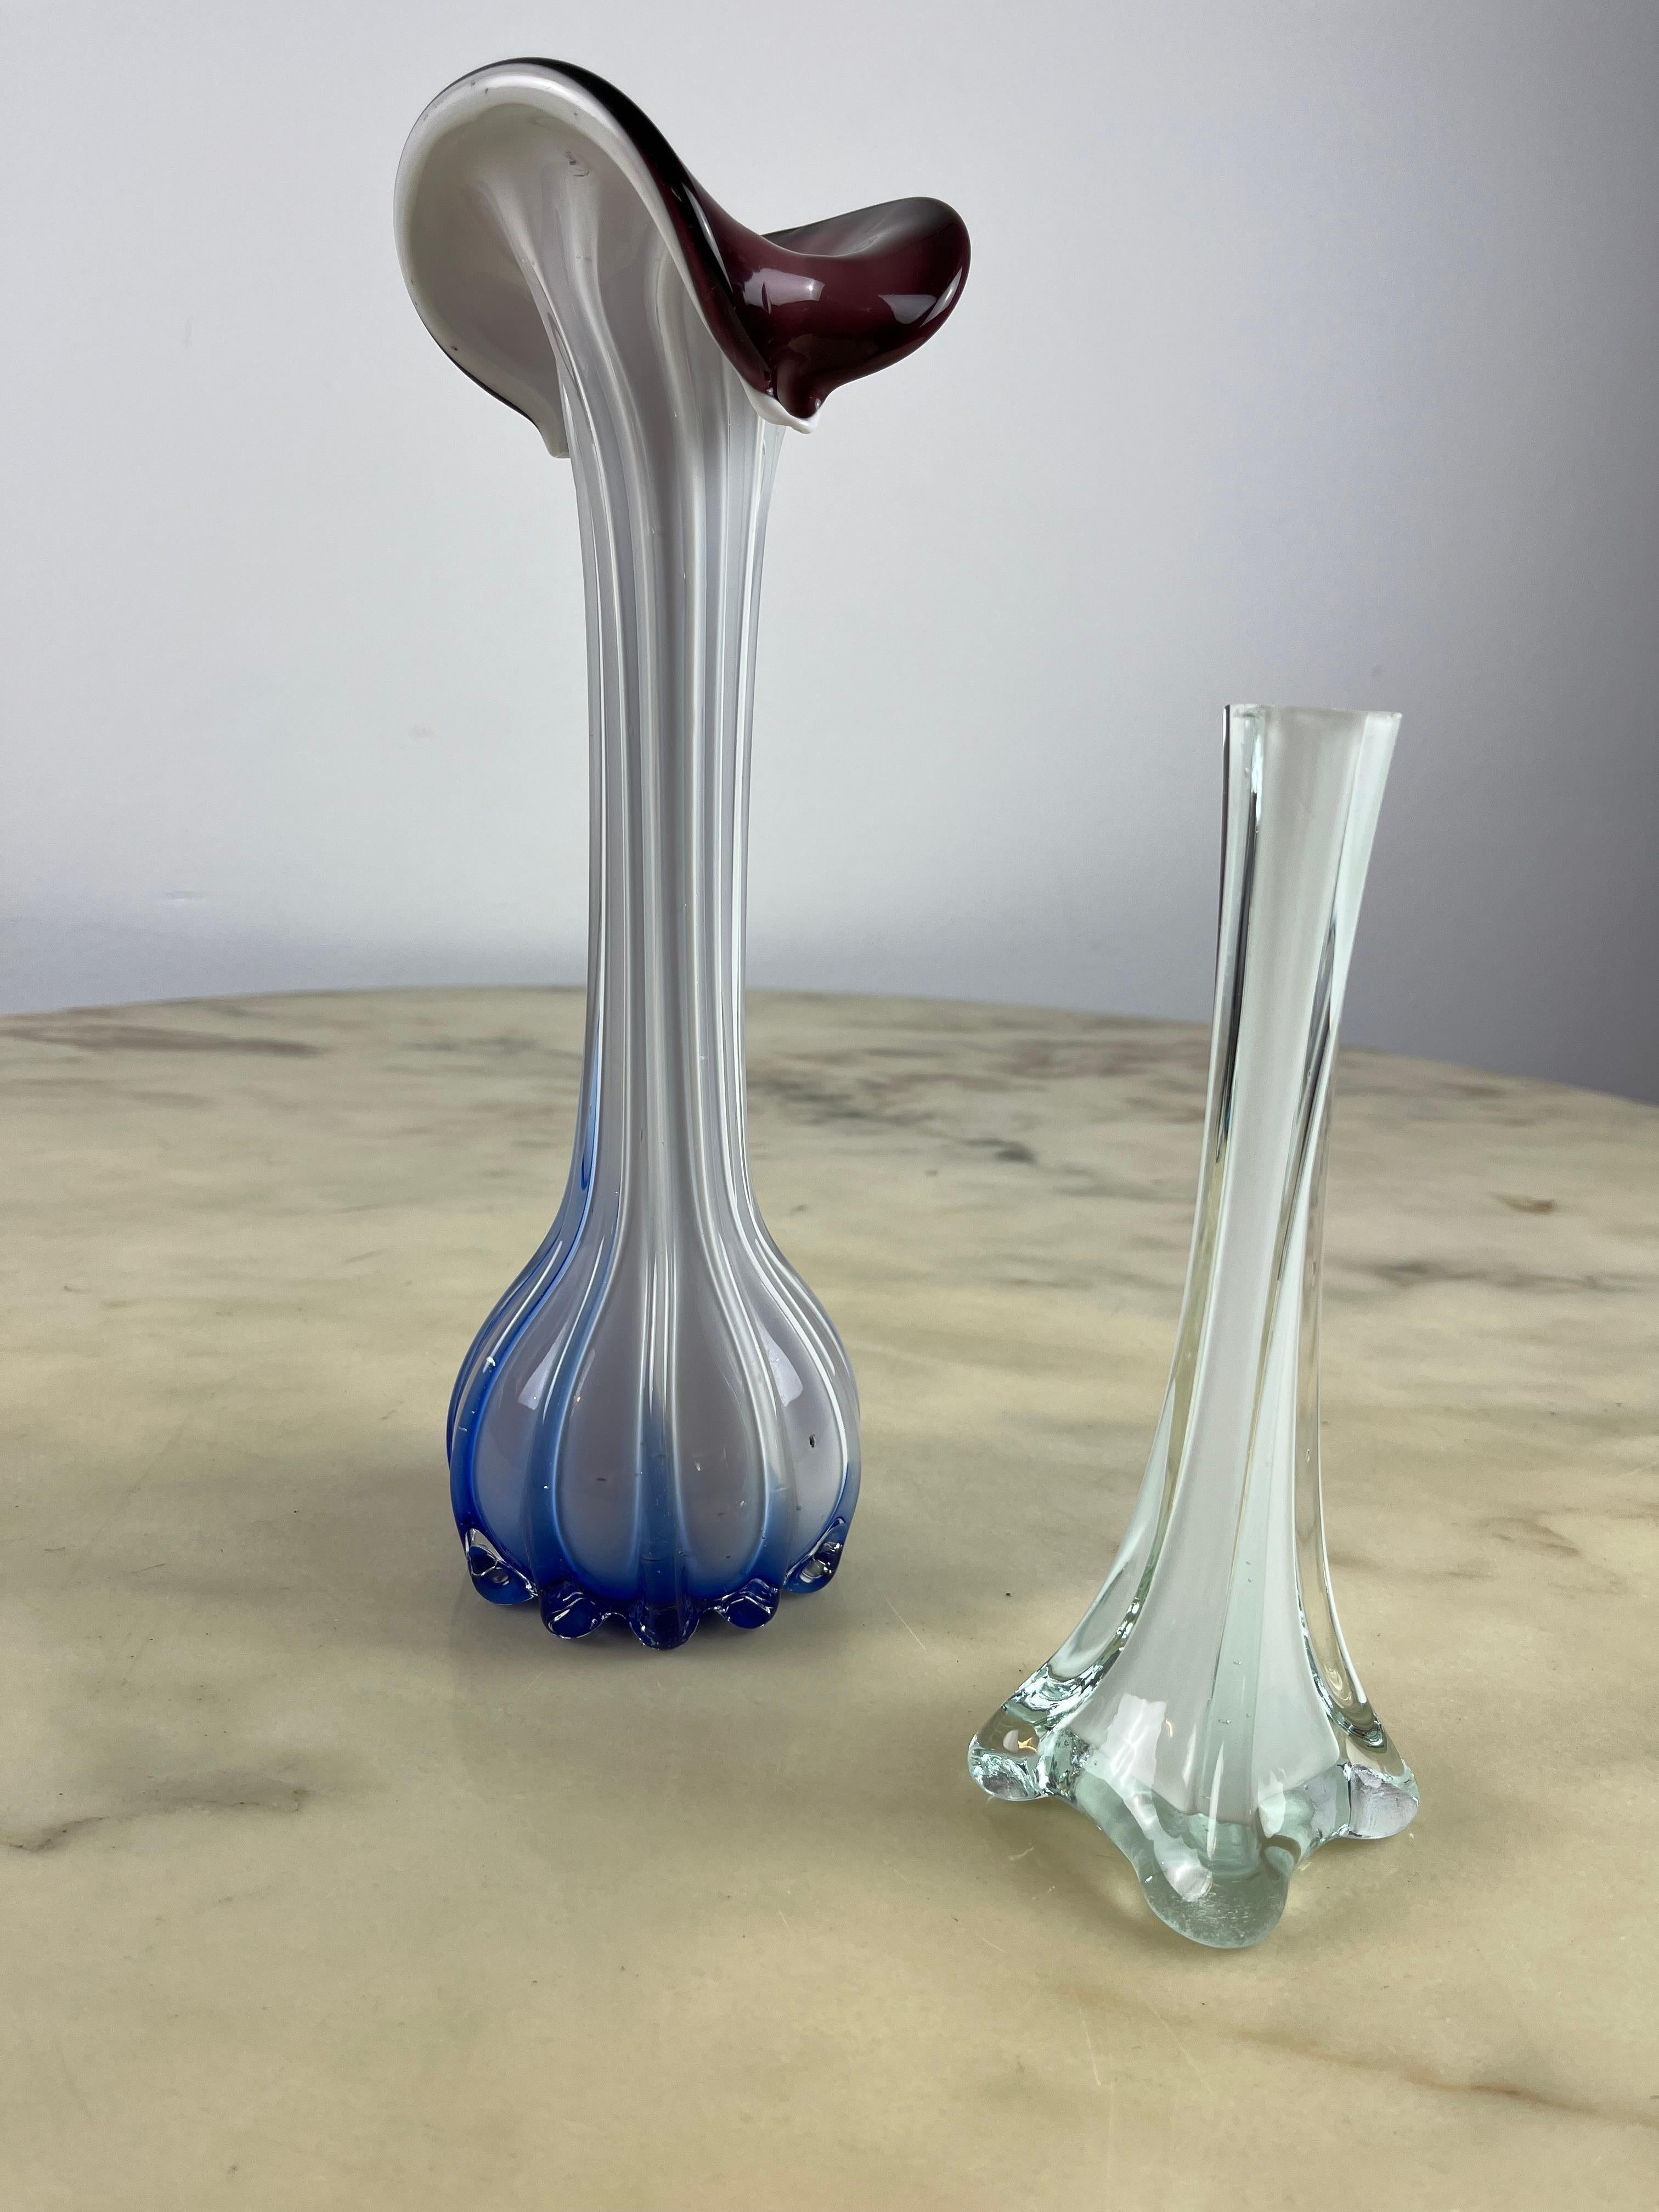 Pair of small Murano vases. The largest is 29 cm high and 8 cm wide; The smallest is 20 cm high and 5.5 cm wide.
They date back to the 1970s. In good condition. The largest has small, negligible flaws.